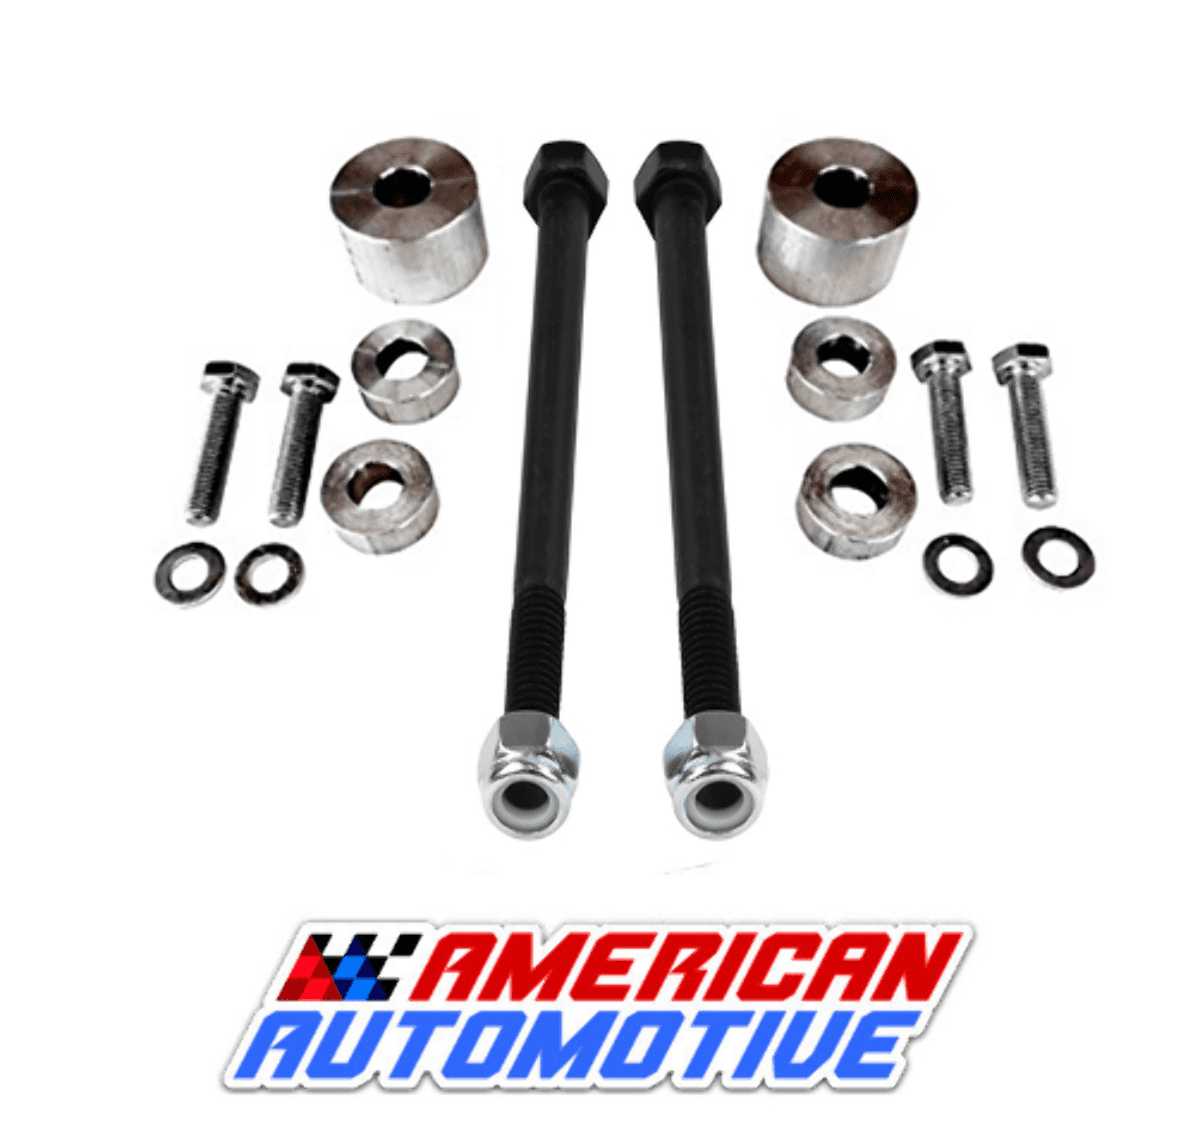 Skid Plate & Diff Drop Kit Fit for 2''-4" Lift fit Tacoma 4runner FJ Cruise 4WD